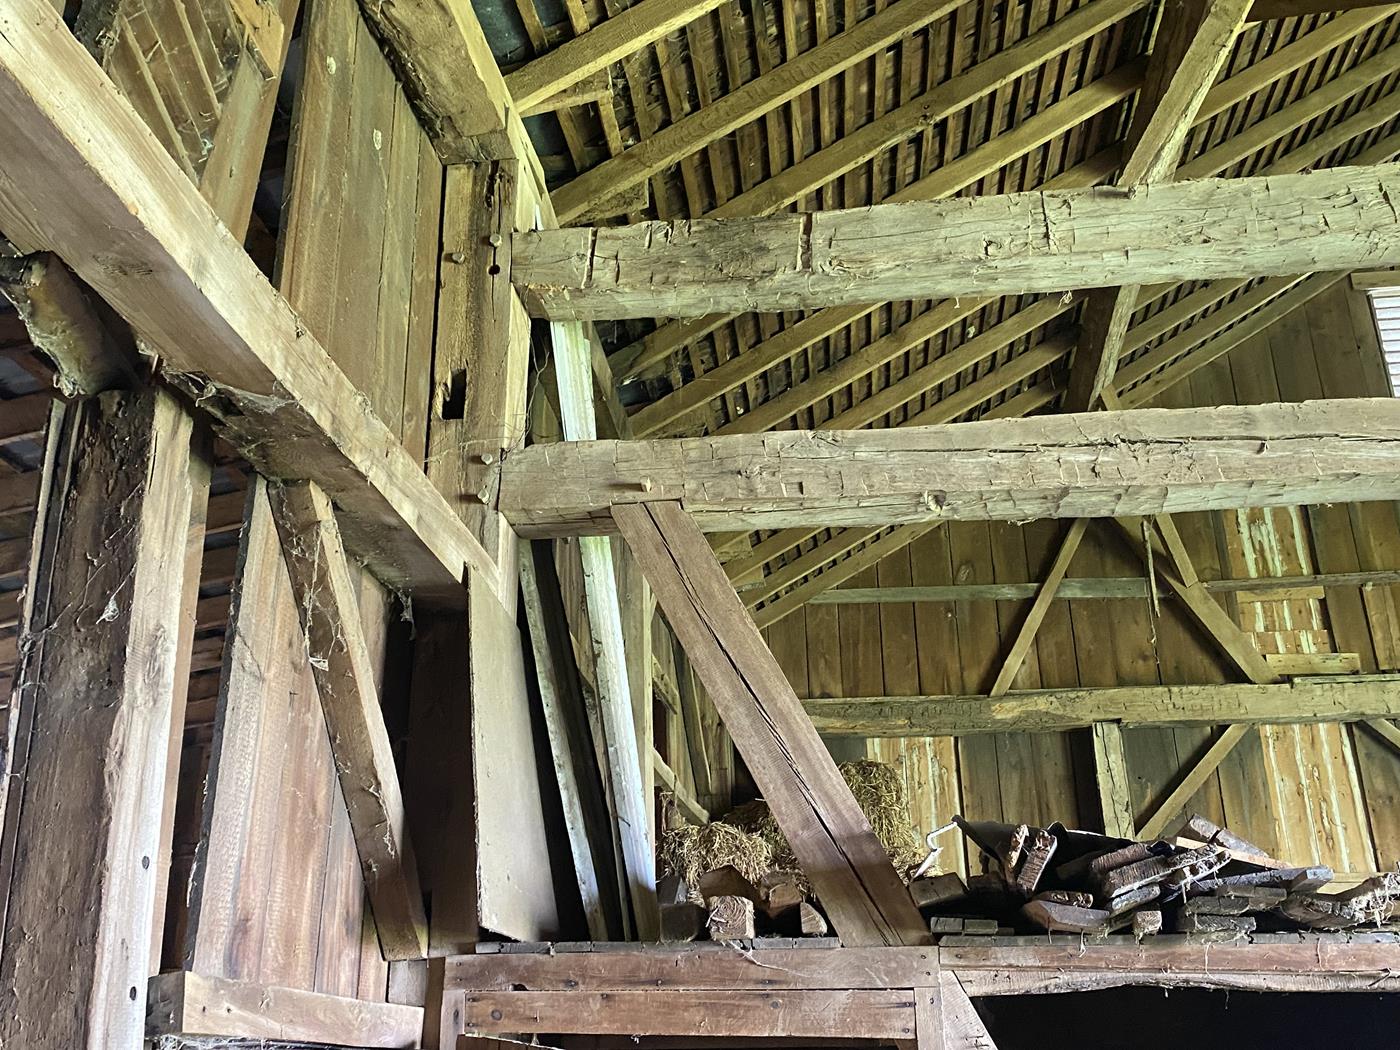 https://www.ohiovalleybarnsalvage.com/images/Marlatt Historic Ohio Barn Frame For Sale - Your Source For Reclaimed Fireplace Mantels